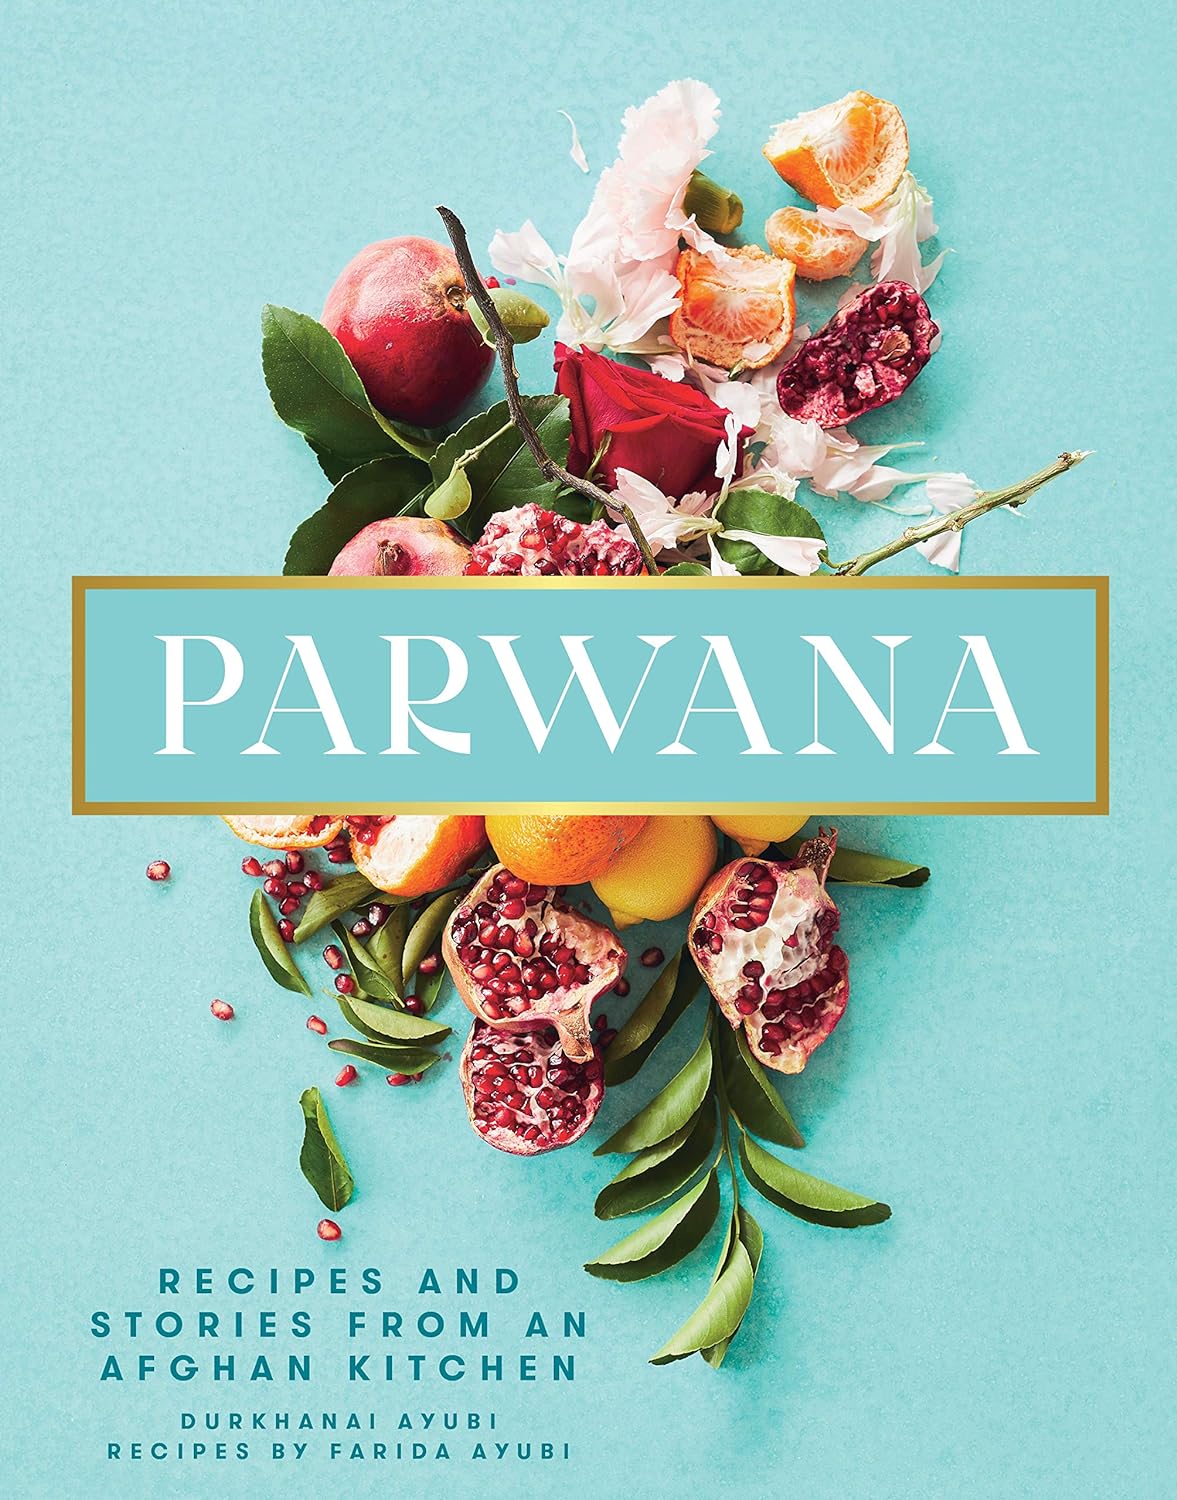 Seize the Opportunity: Parwana: Recipes and stories from an Afghan kitchen - 43% off!